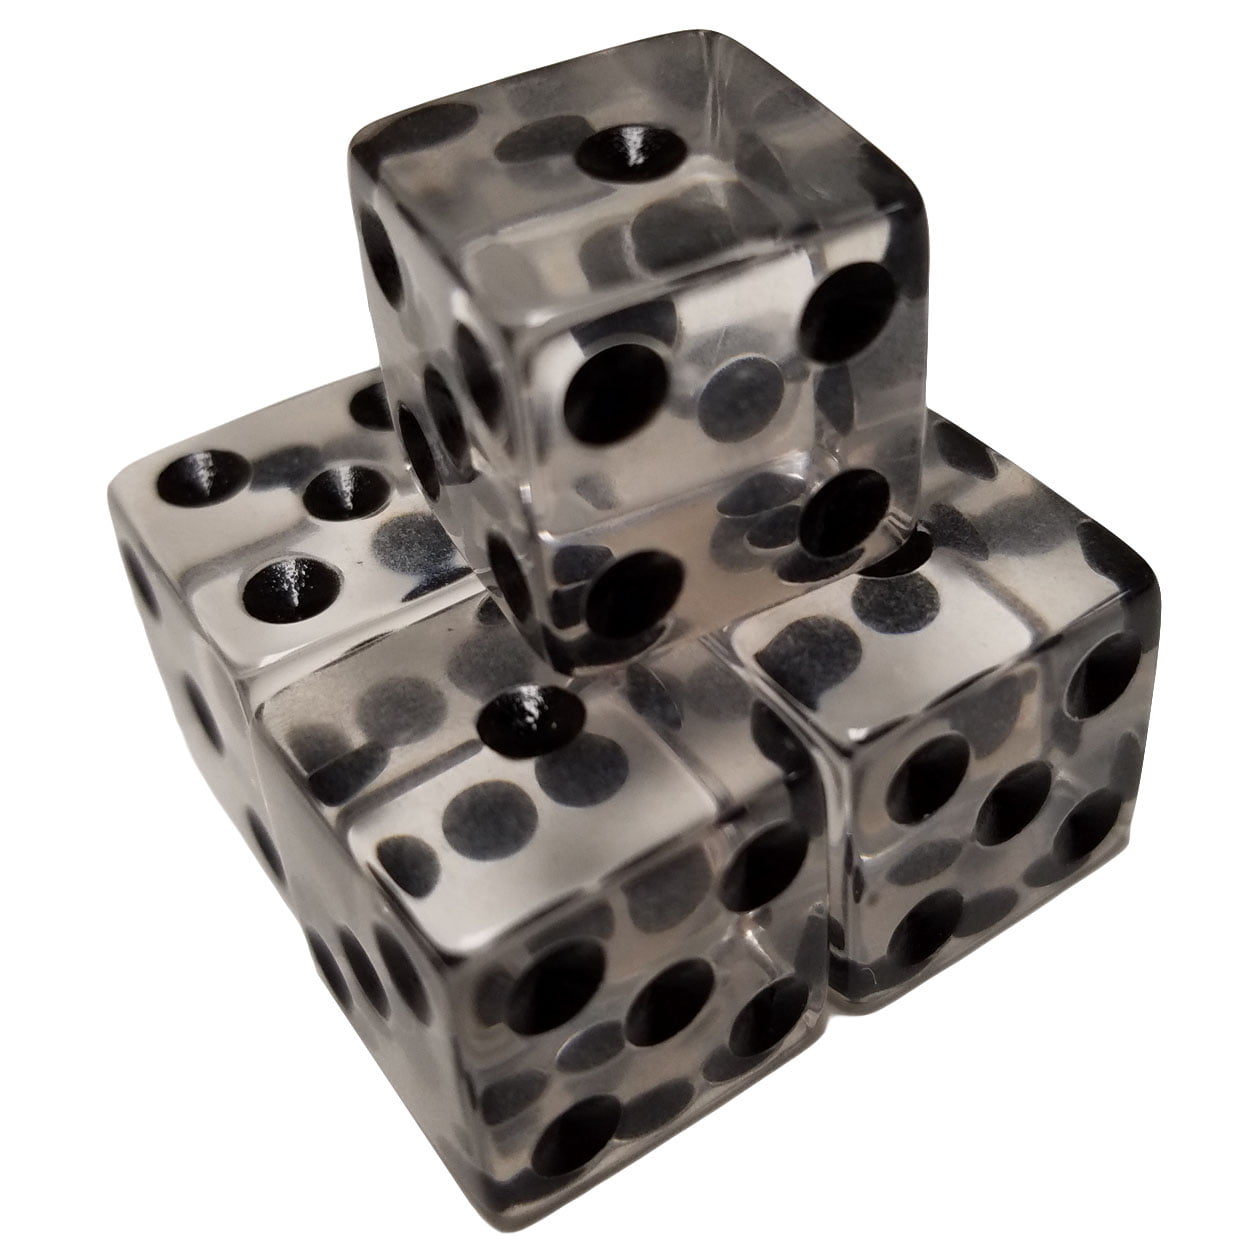 5 Olympic Pearlized Silver Dice Square Corner 16mm Opaque Black Pips Organza Bag 